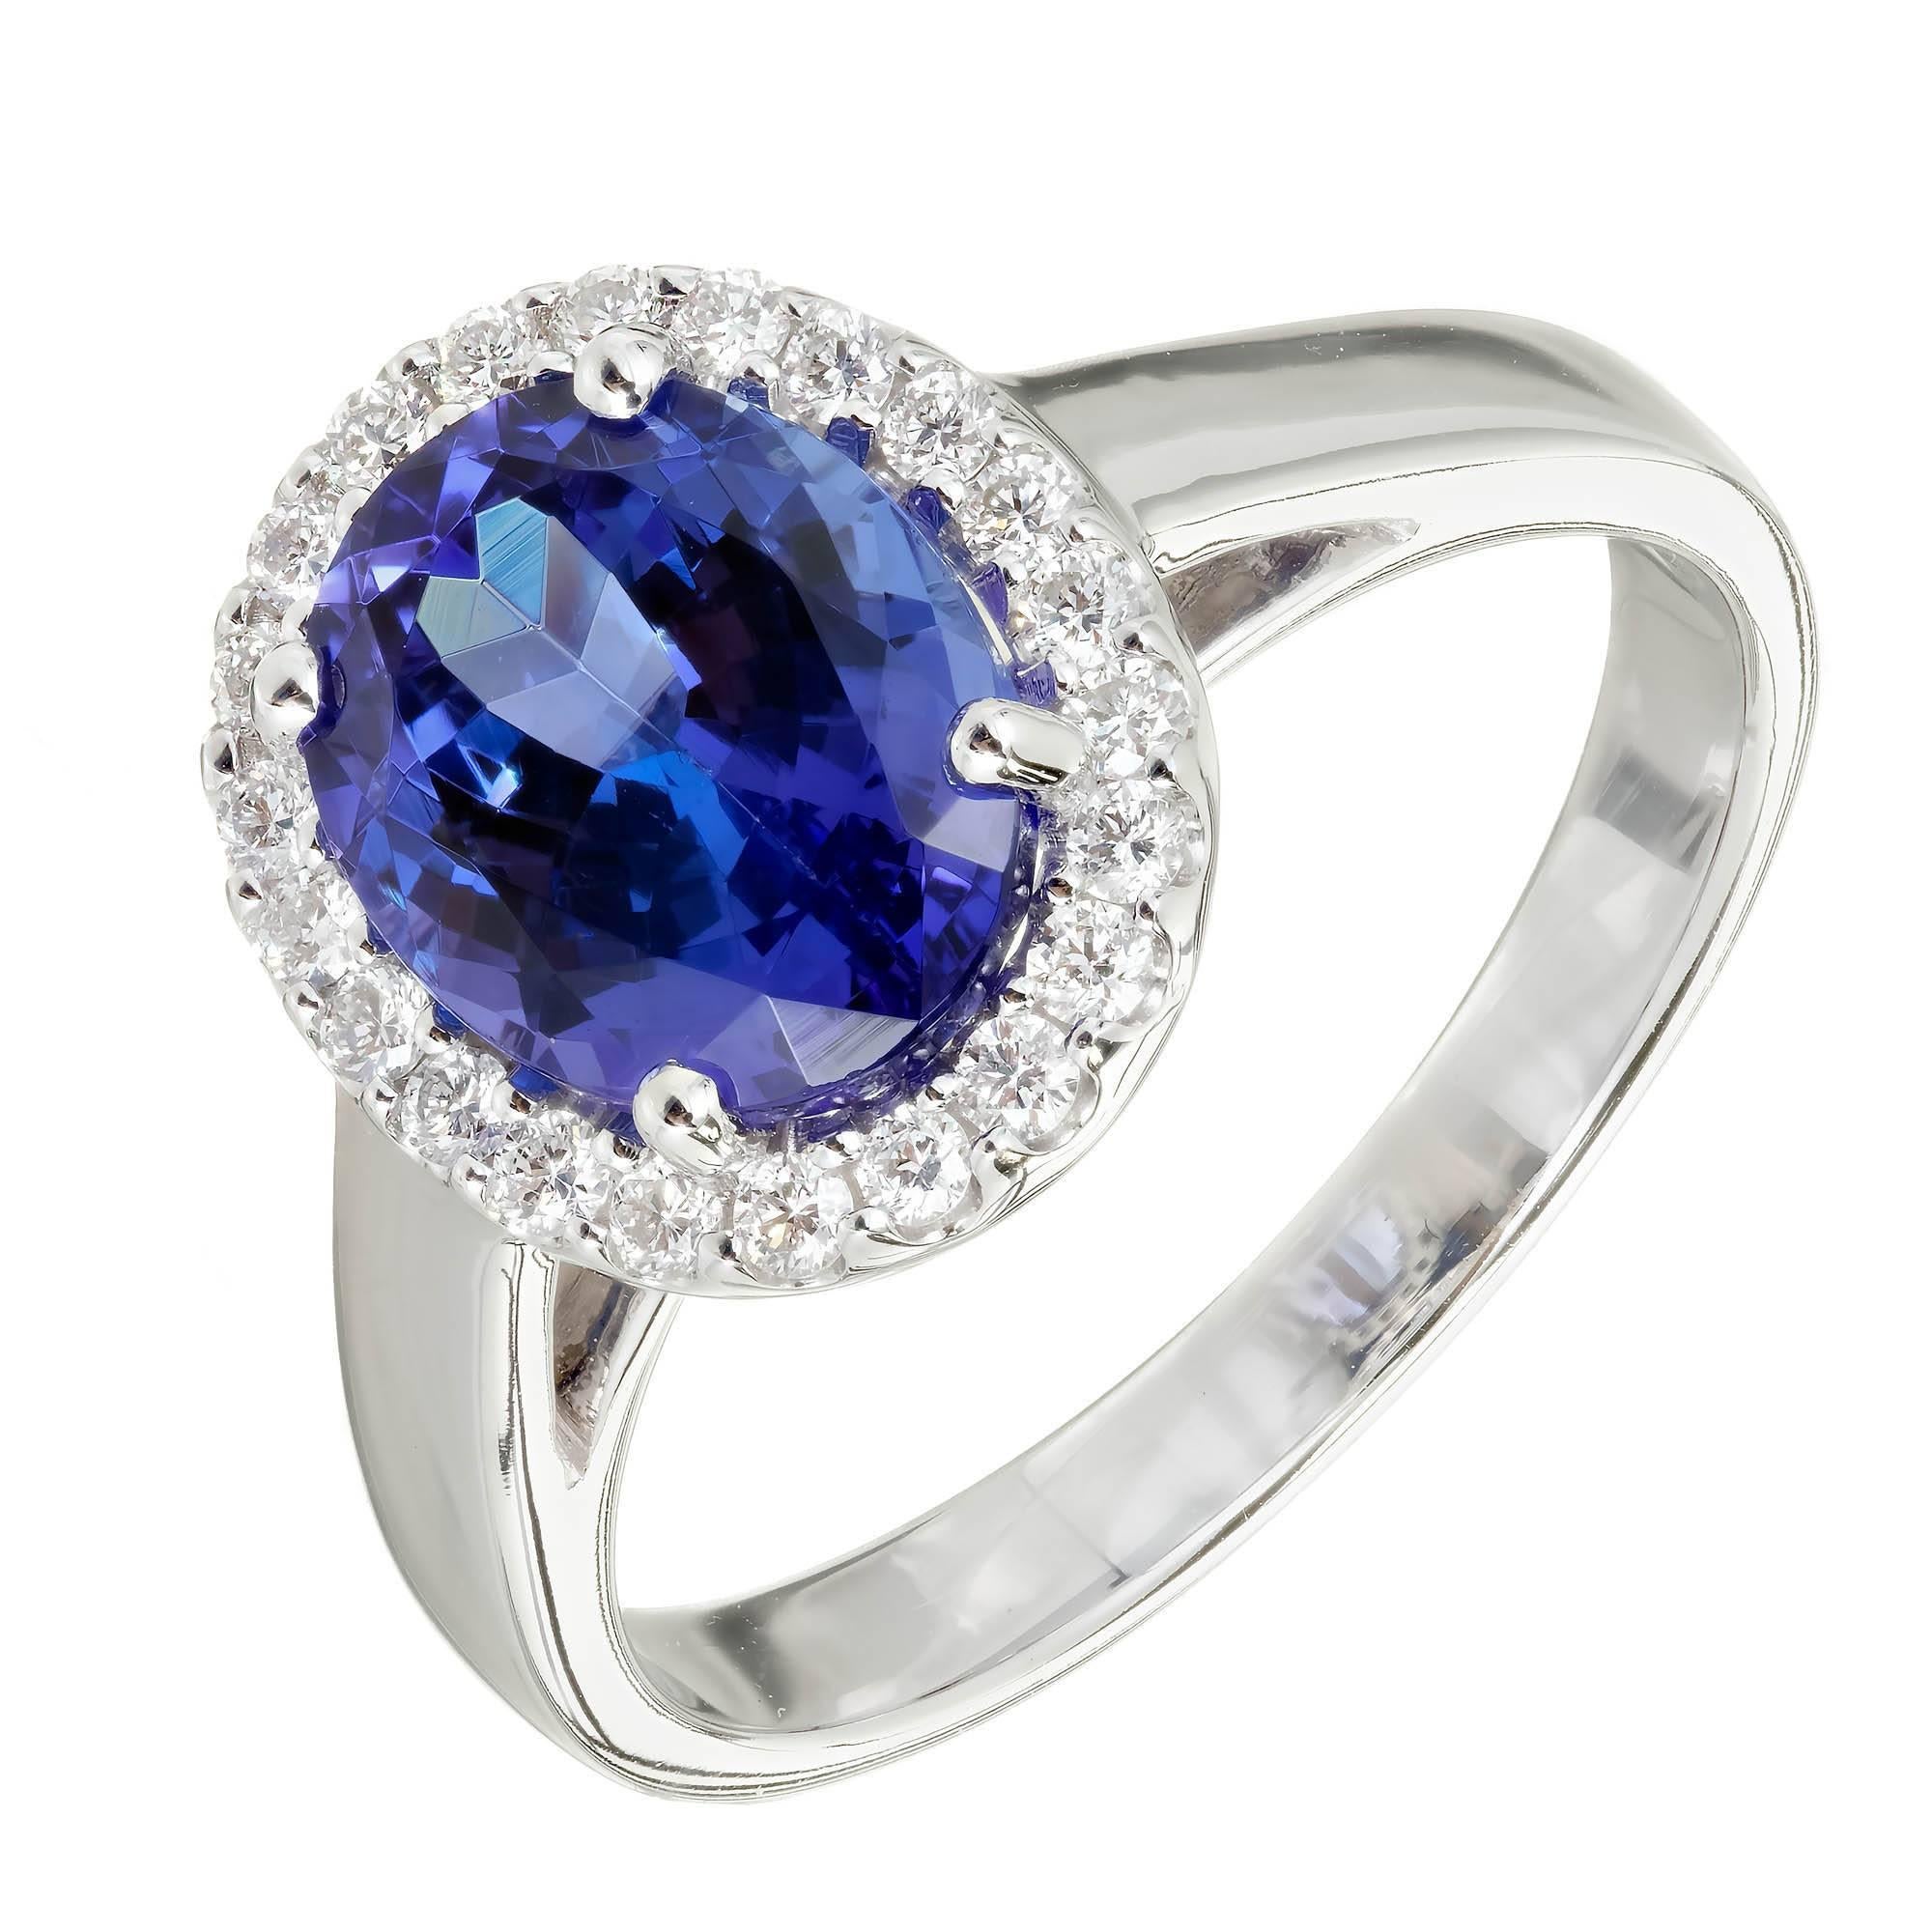 Peter Suchy oval Tanzanite Diamond cocktail ring with bright white full cut Diamonds surrounding a beautiful bright blue oval Tanzanite in a 18k white gold setting. 
	 
1 oval purplish-blue Tanzanite, approx. total weight 2.22cts, 9 x 7mm
23 round